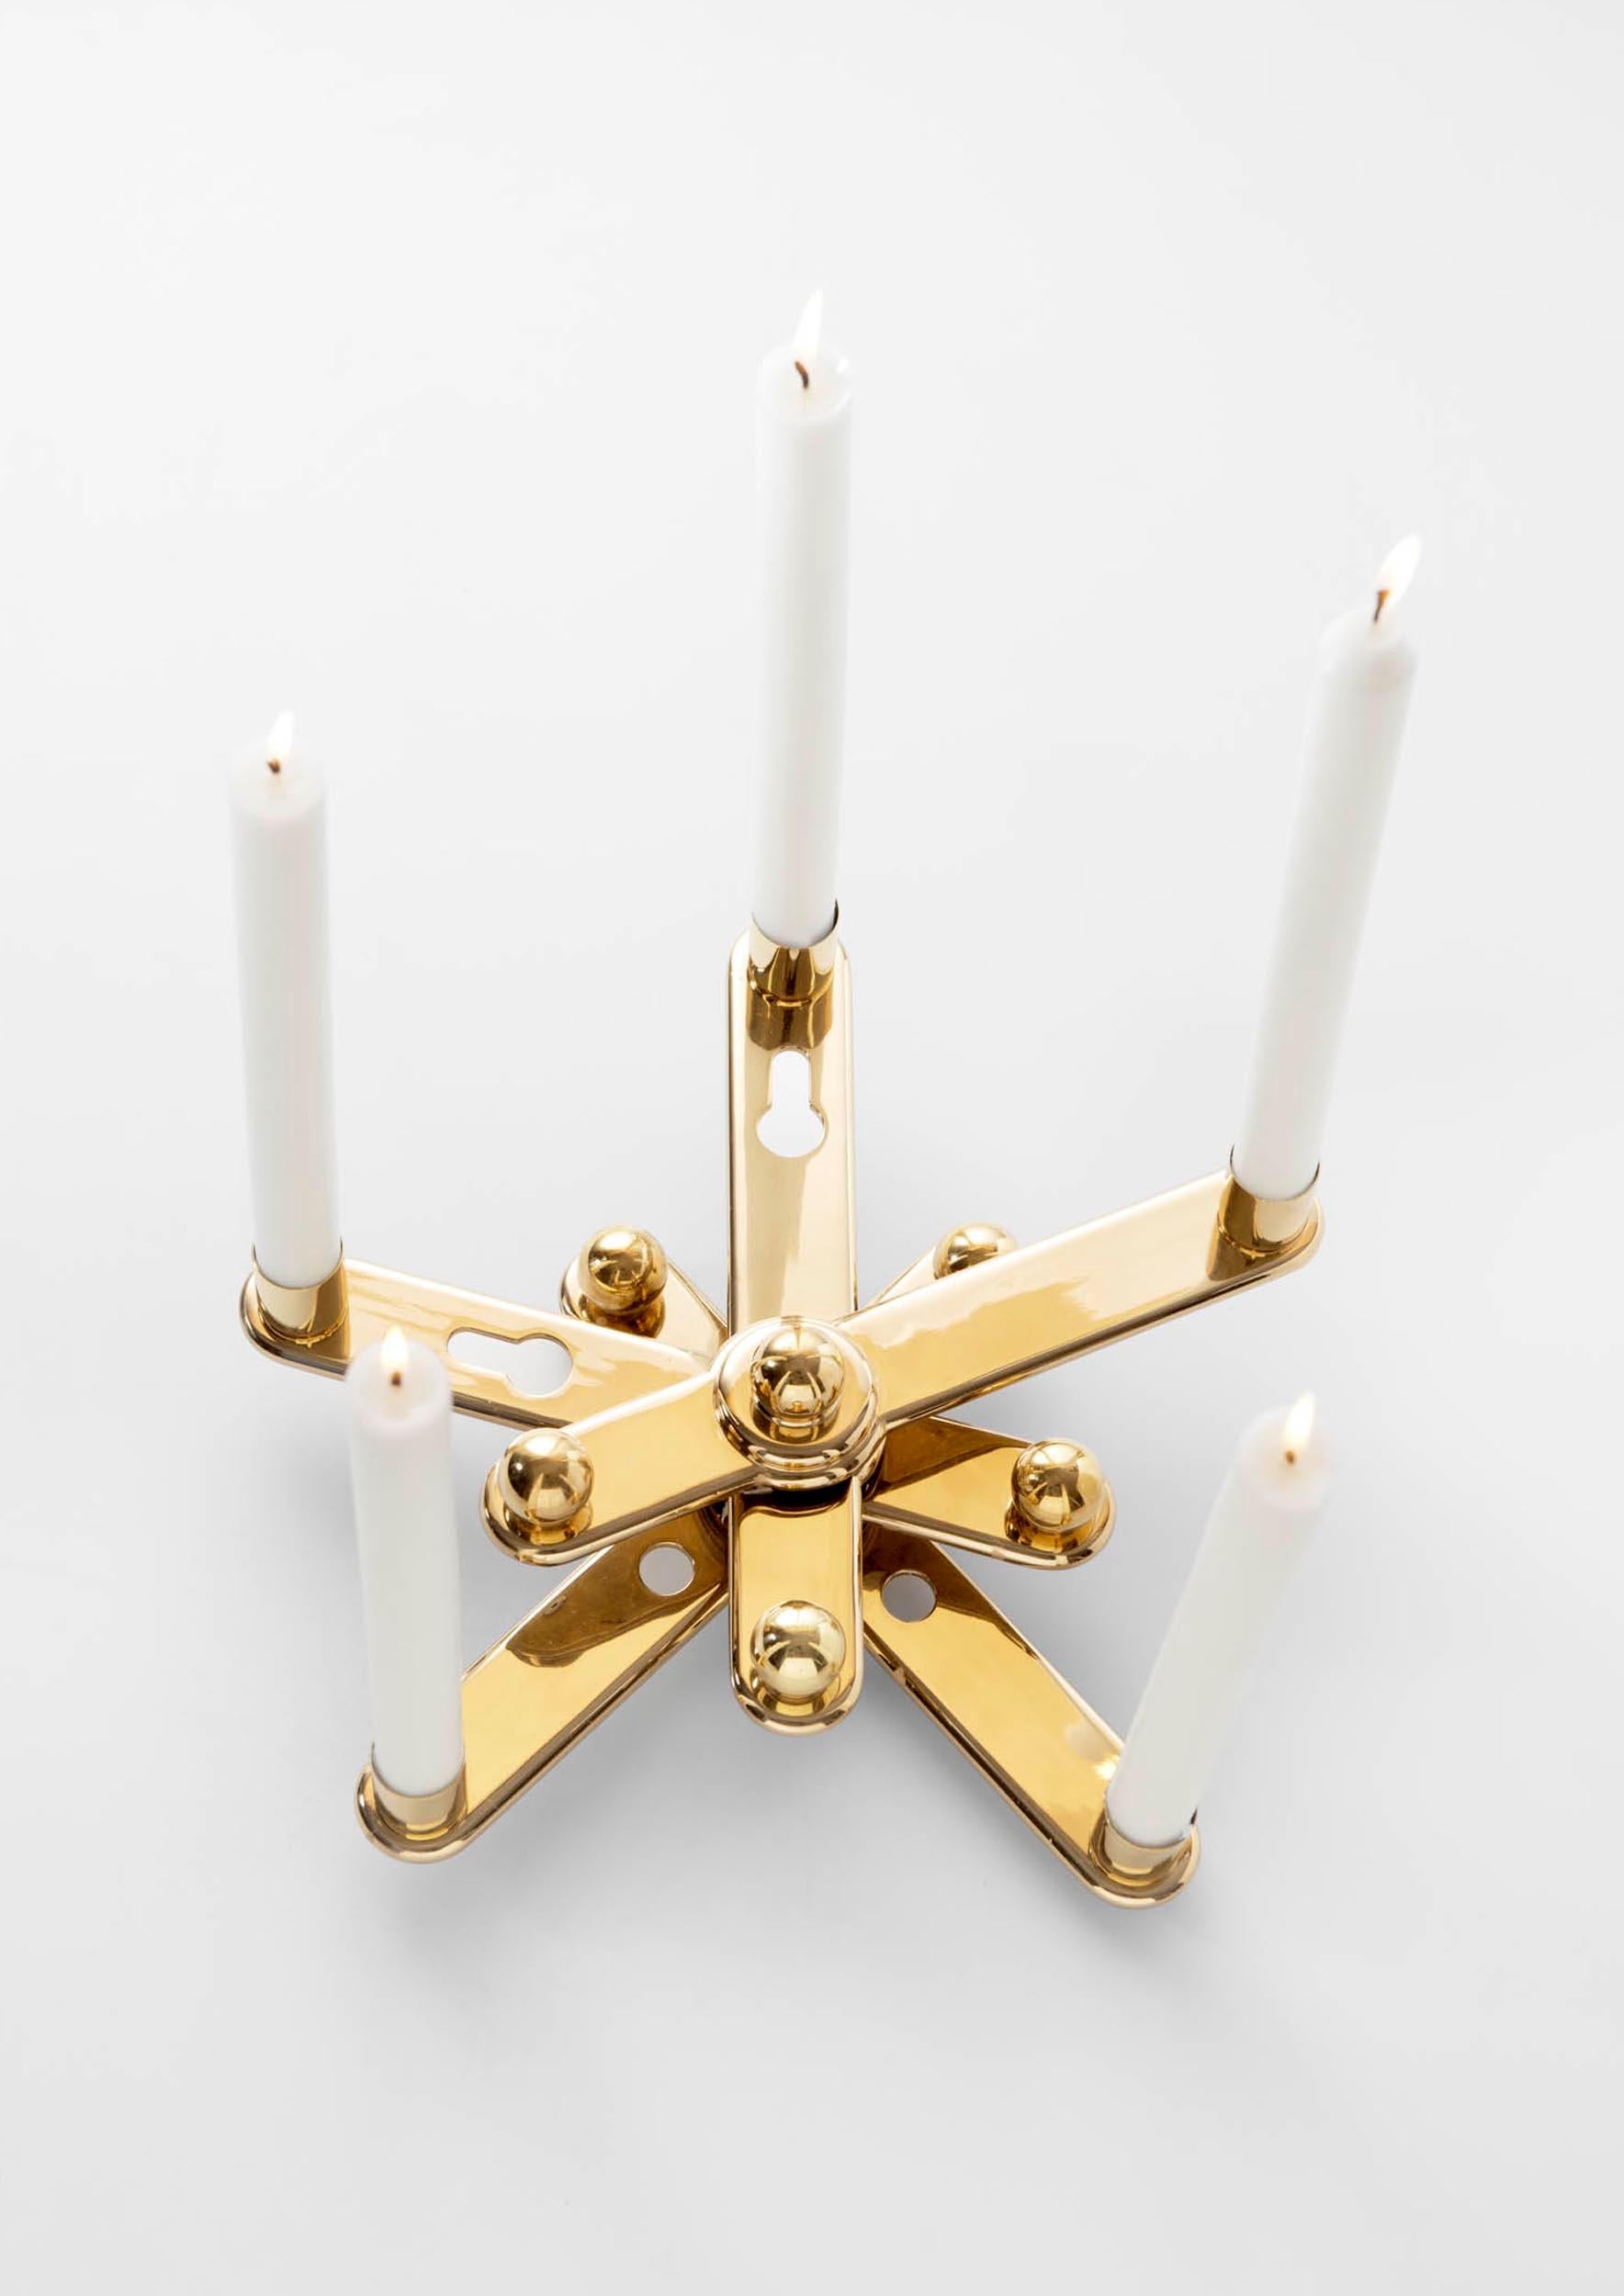 Remix candleholders by Ramón Úbeda
Limited Edition of 75u
Dimensions: 28 x 29 x 9 H cm
Materials: Polished varnished brass 

Curro Claret (Barcelona, 1968) studied Industrial Design in the Escuela Superior of Diseño Elisava and in Central Saint